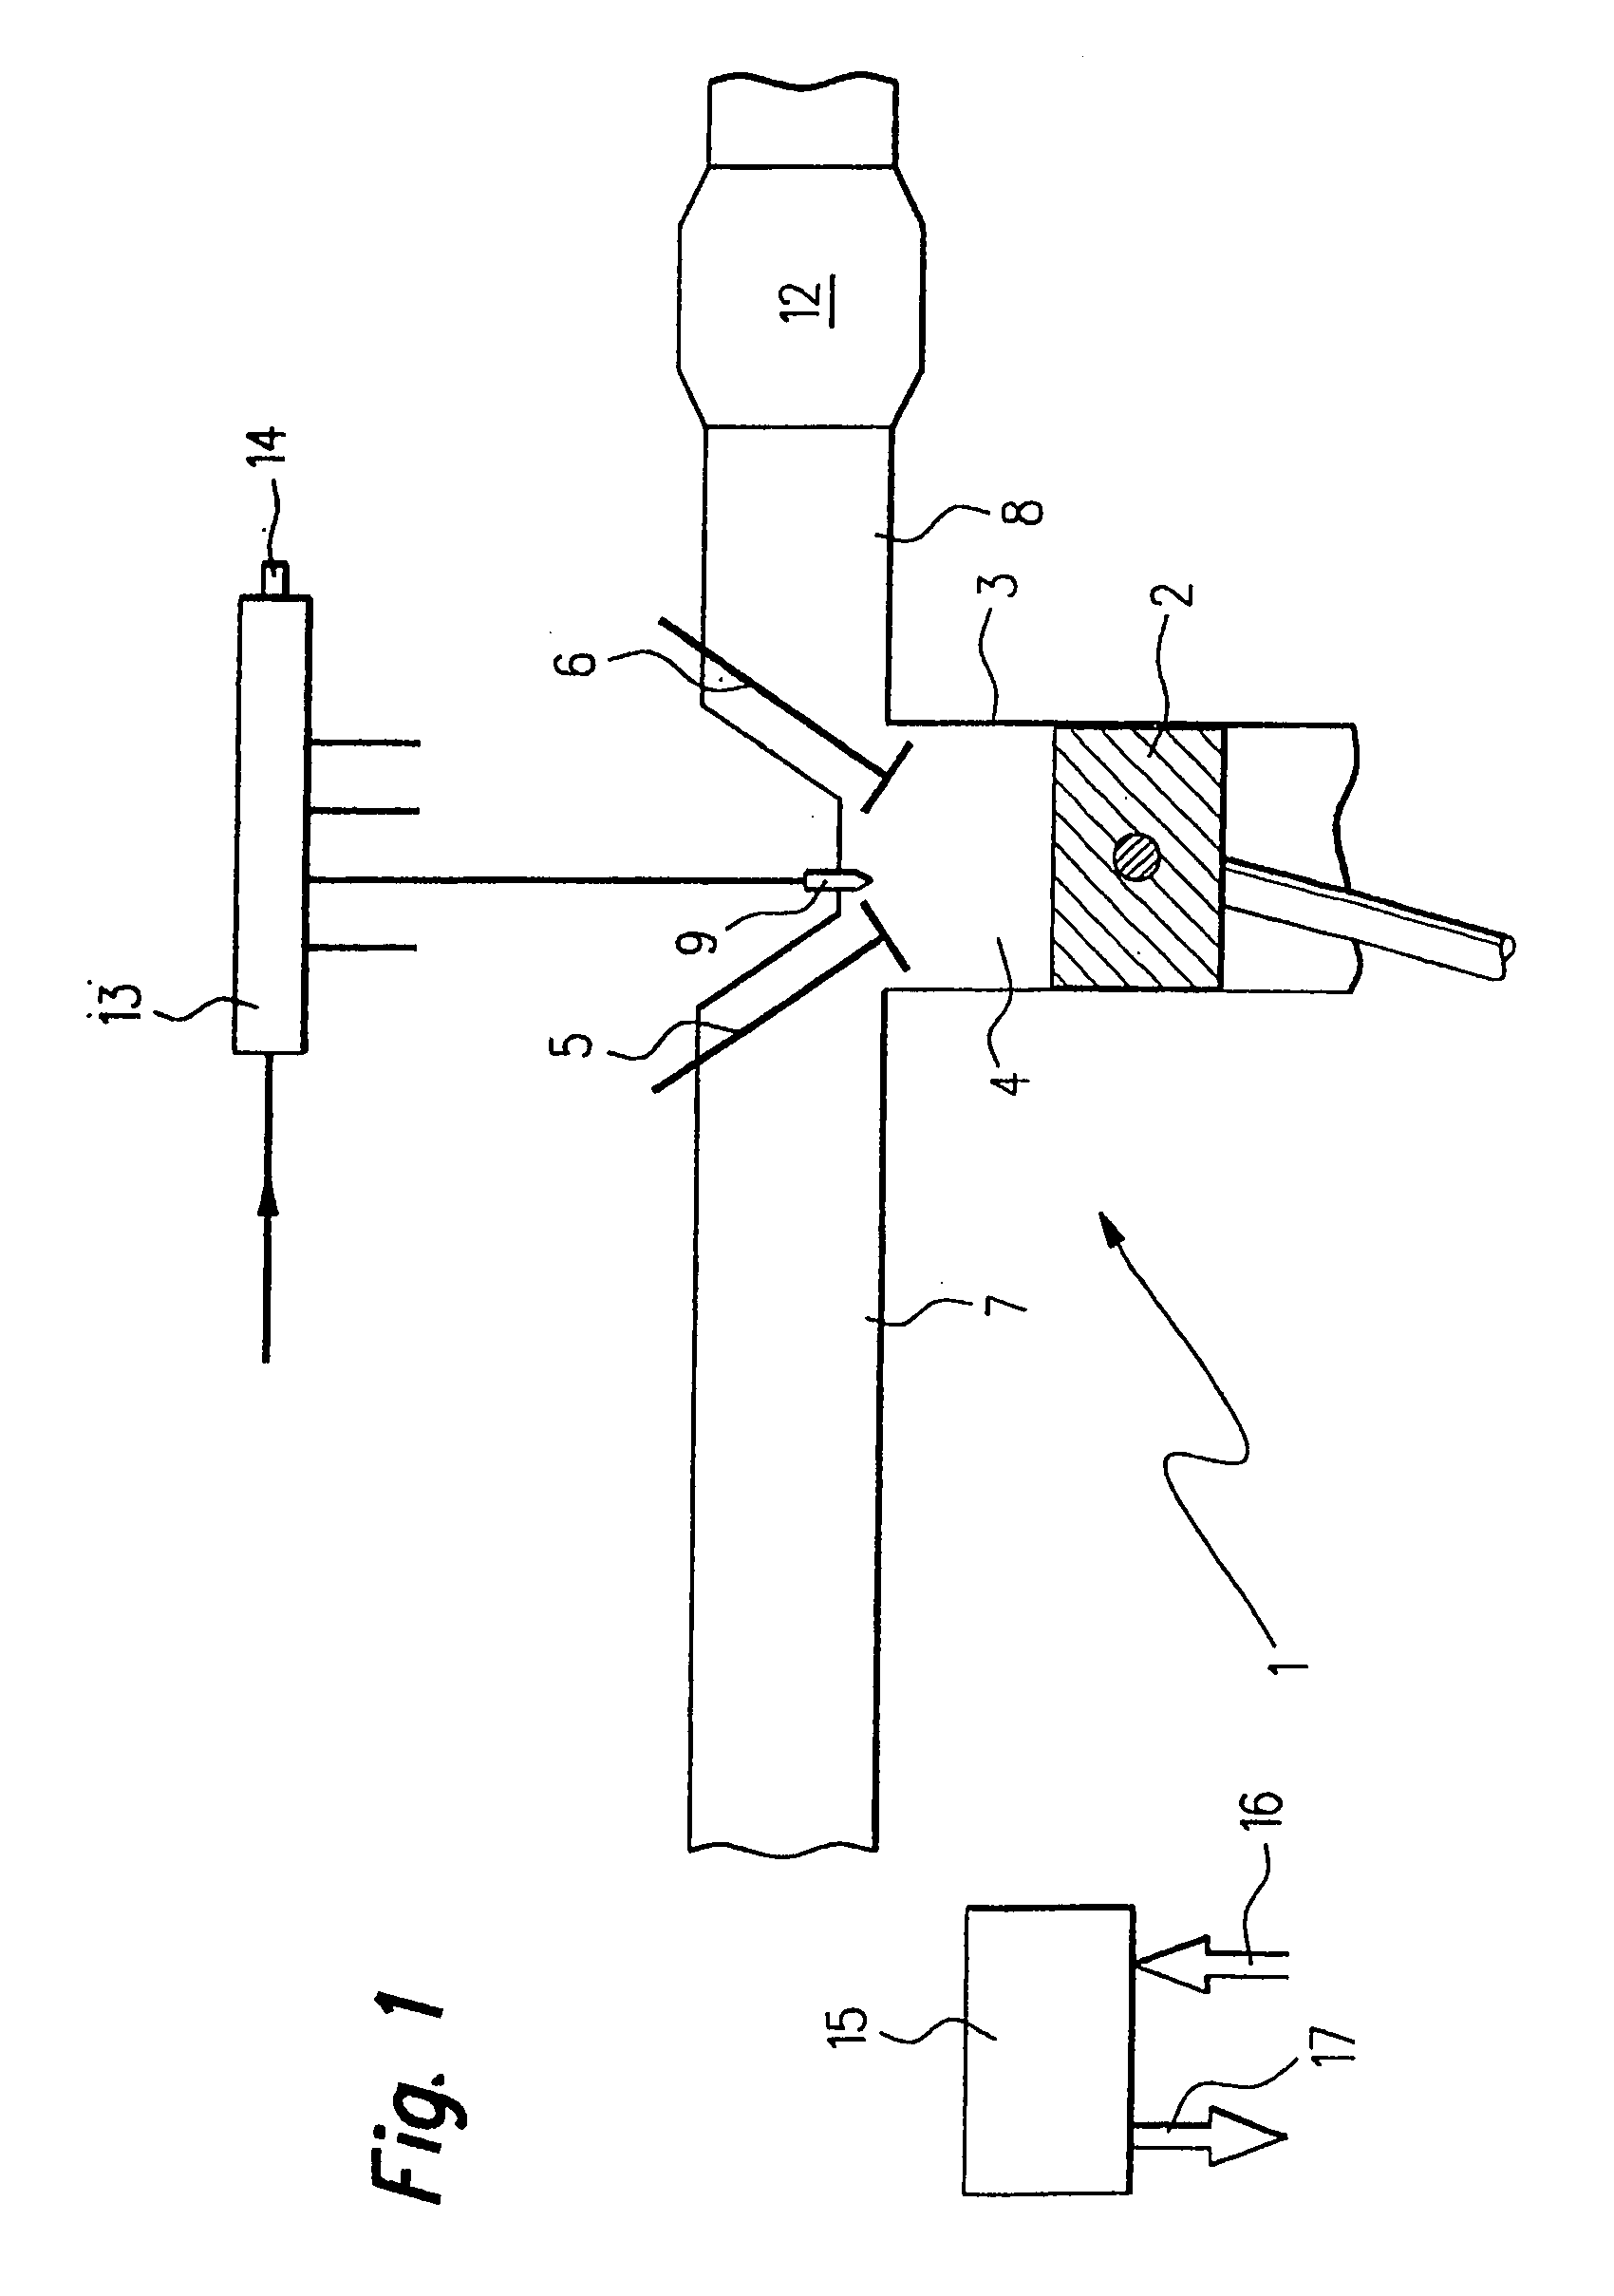 Method For Operating An Internal Combustion Engine, Taking Into Consideration The Individual Properties Of The Injection Devices